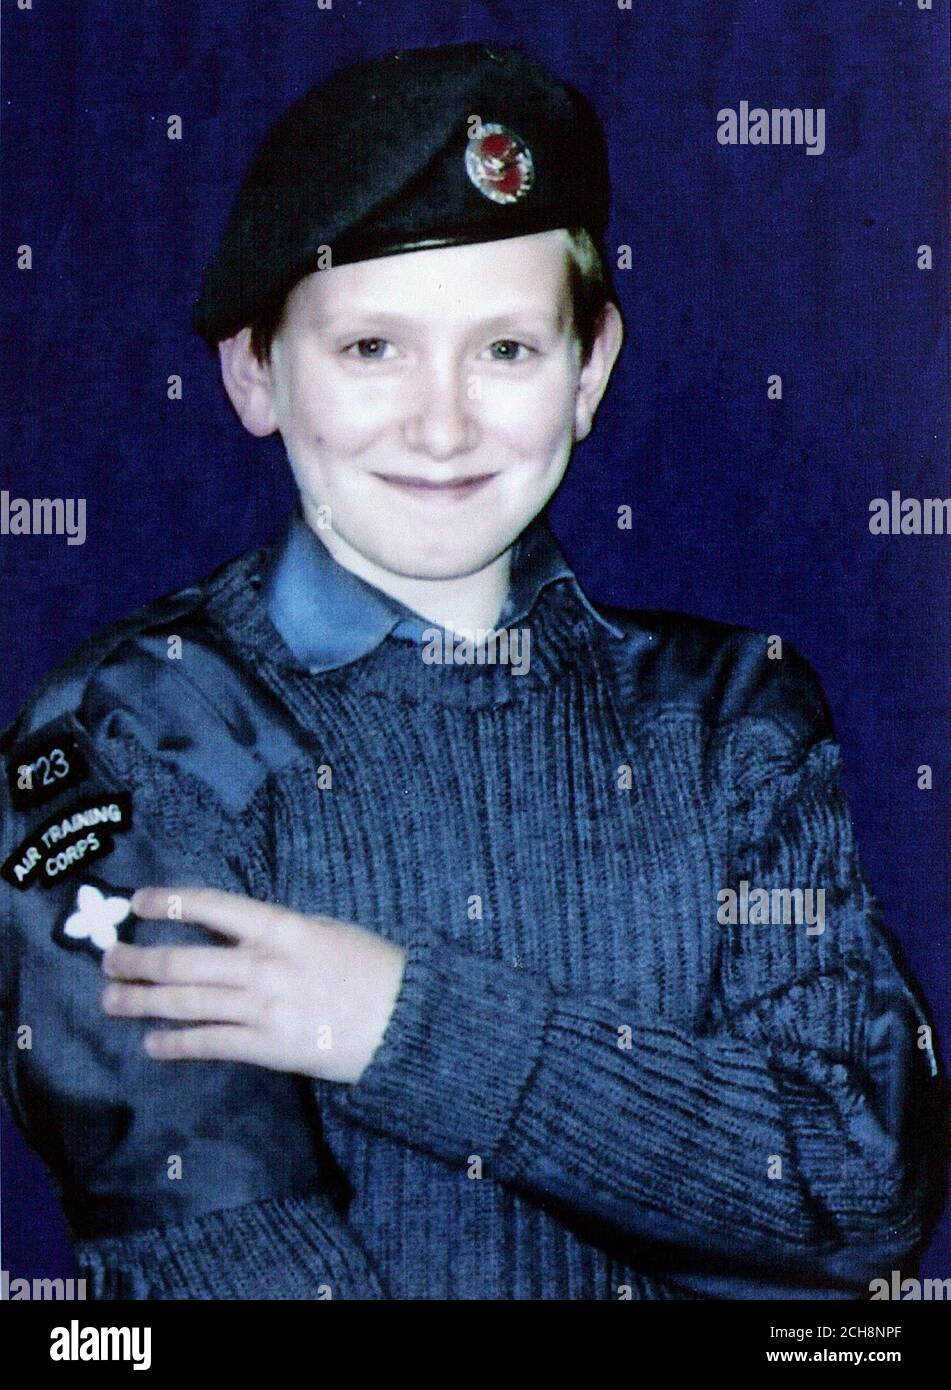 Undated family collect image of Shaun Noonan, 14, who was found hanged with his school tie after he fell victim to a campaign of bullying including a 'happy slapping' incident, an inquest heard, Friday September 2 2005. Shaun Noonan, 14, was headbutted, thrown into a ditch, stamped on, chased and had an earring pulled out by thugs at Sutton High School in Ellesmere Port, Cheshire. His parents, ex-soldier Gary and care assistant Diane, spoke to the school several times and asked for Shaun to be moved to a different school, in which he had more friends. See PA Story INQUEST Happyslap. PRESS ASSO Stock Photo